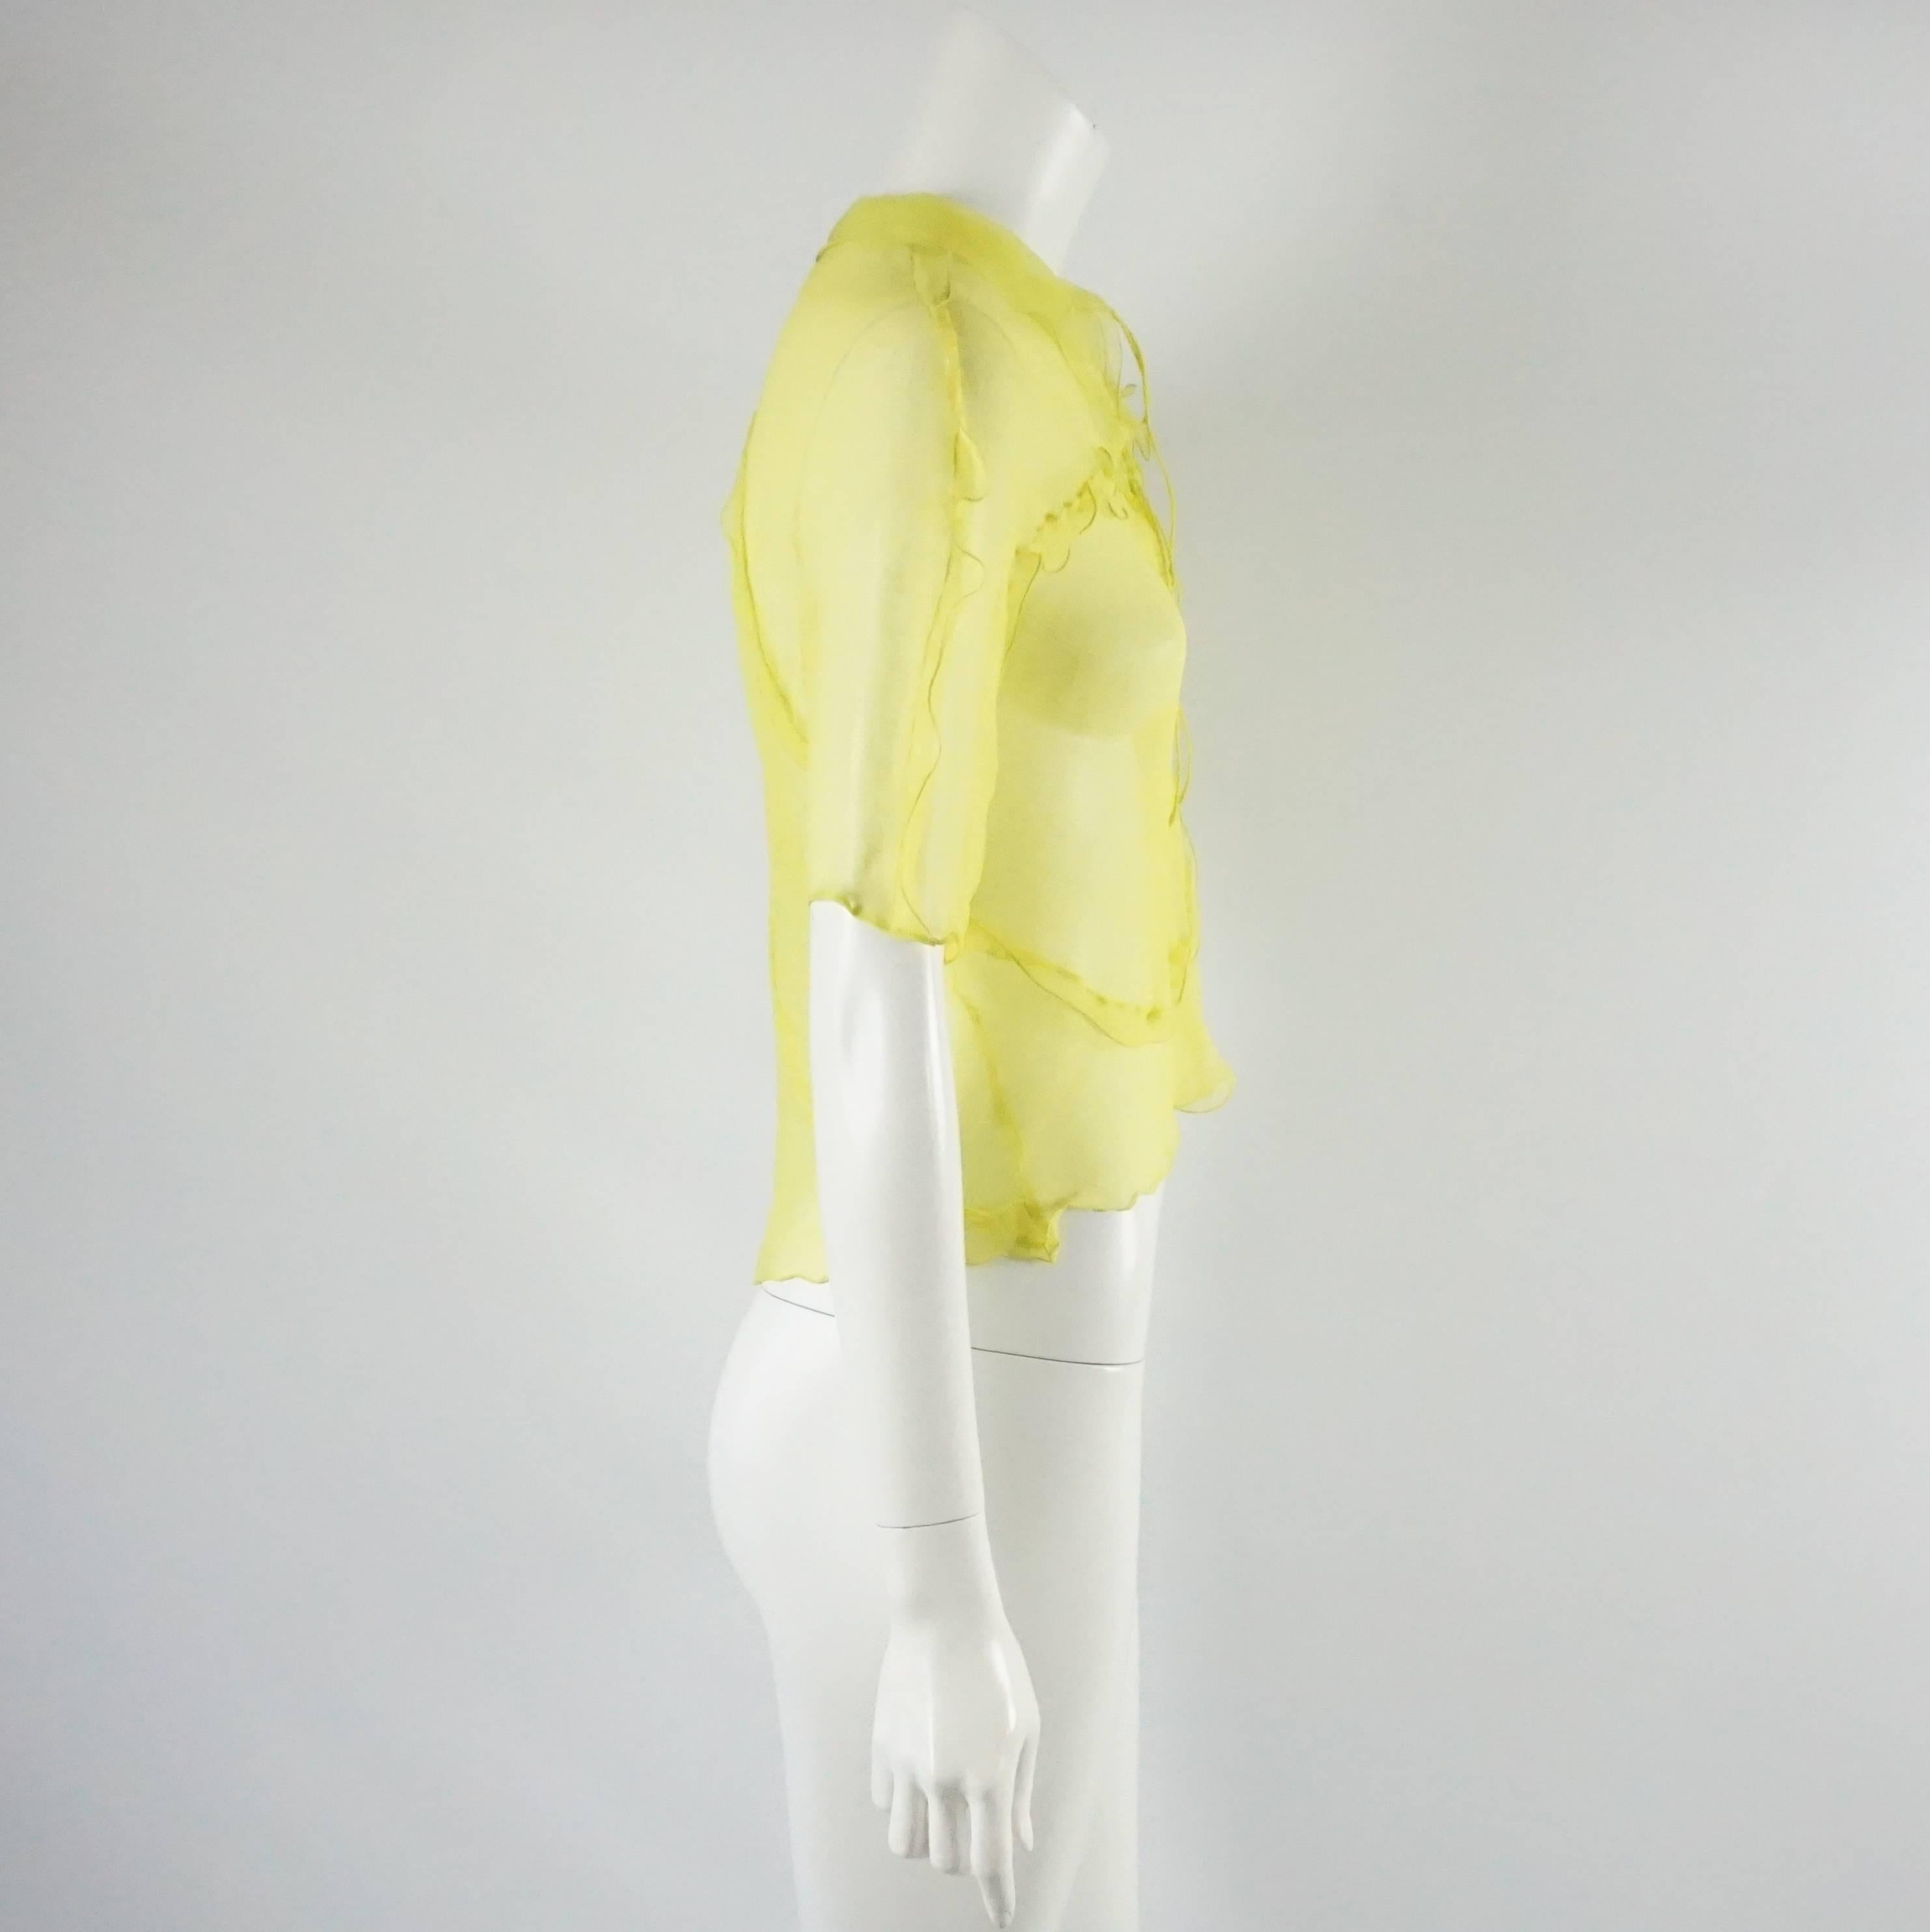 This Fendi top is yellow and silk chiffon. It has short sleeves and ruffles. There are two ties on the front that can be tied or untied and the fabric is stretchable. This top is in excellent condition. Size small.

Measurements
Sleeve Length